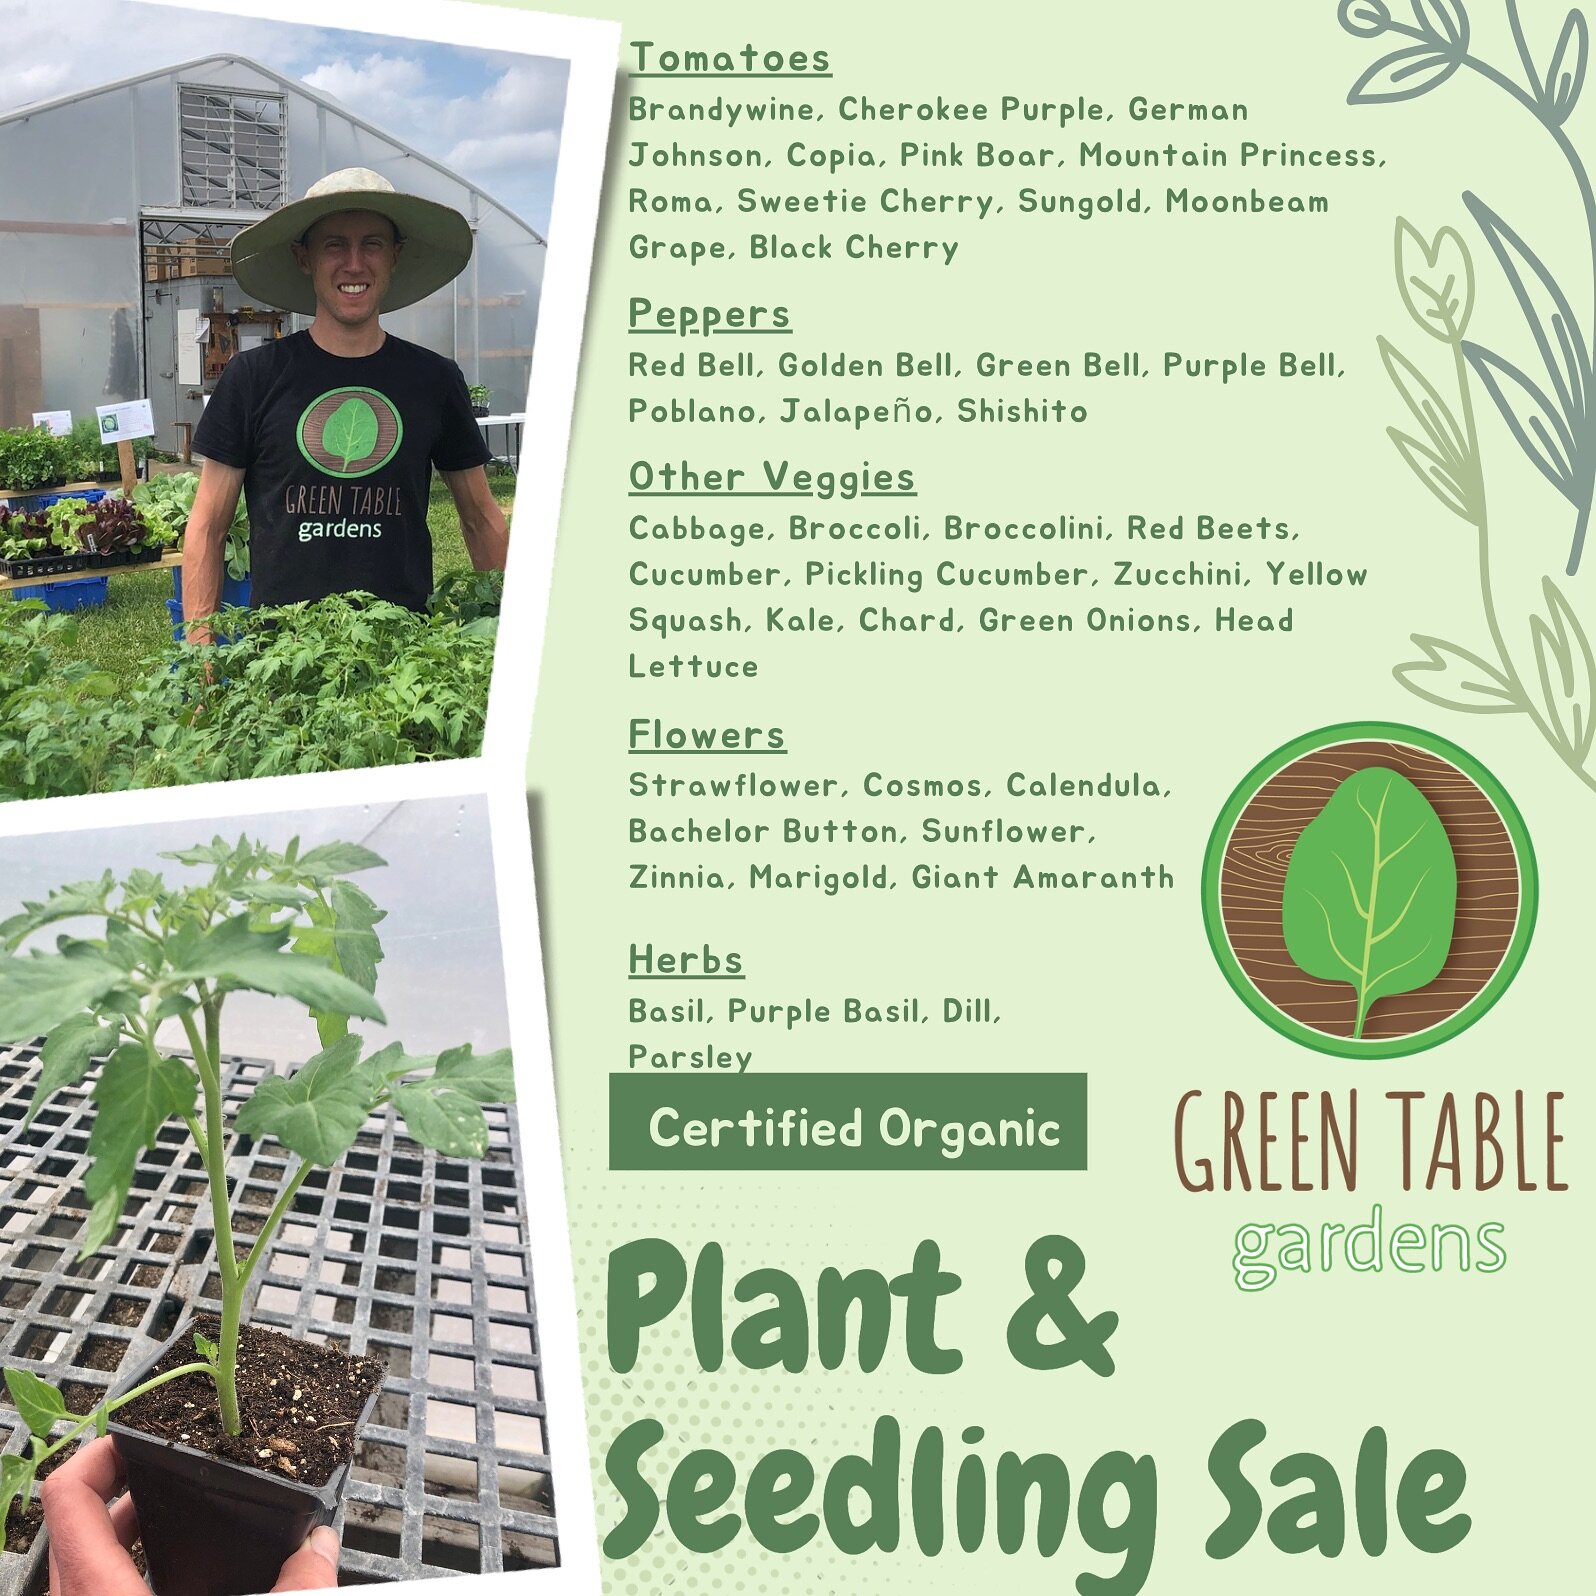 Plant Sale is coming! Hope you can come out this year - May 3rd 2-6. May 4th 9-3. May 11th 9-3. 

We have thousands of organic tomatoes, peppers, cucumbers, squash, melons, greens, veggies, flowers, and herbs. 
🌶️🫑🥦🥒🍅🌱🌻🌸💐🌿🪴🧅

Full list an